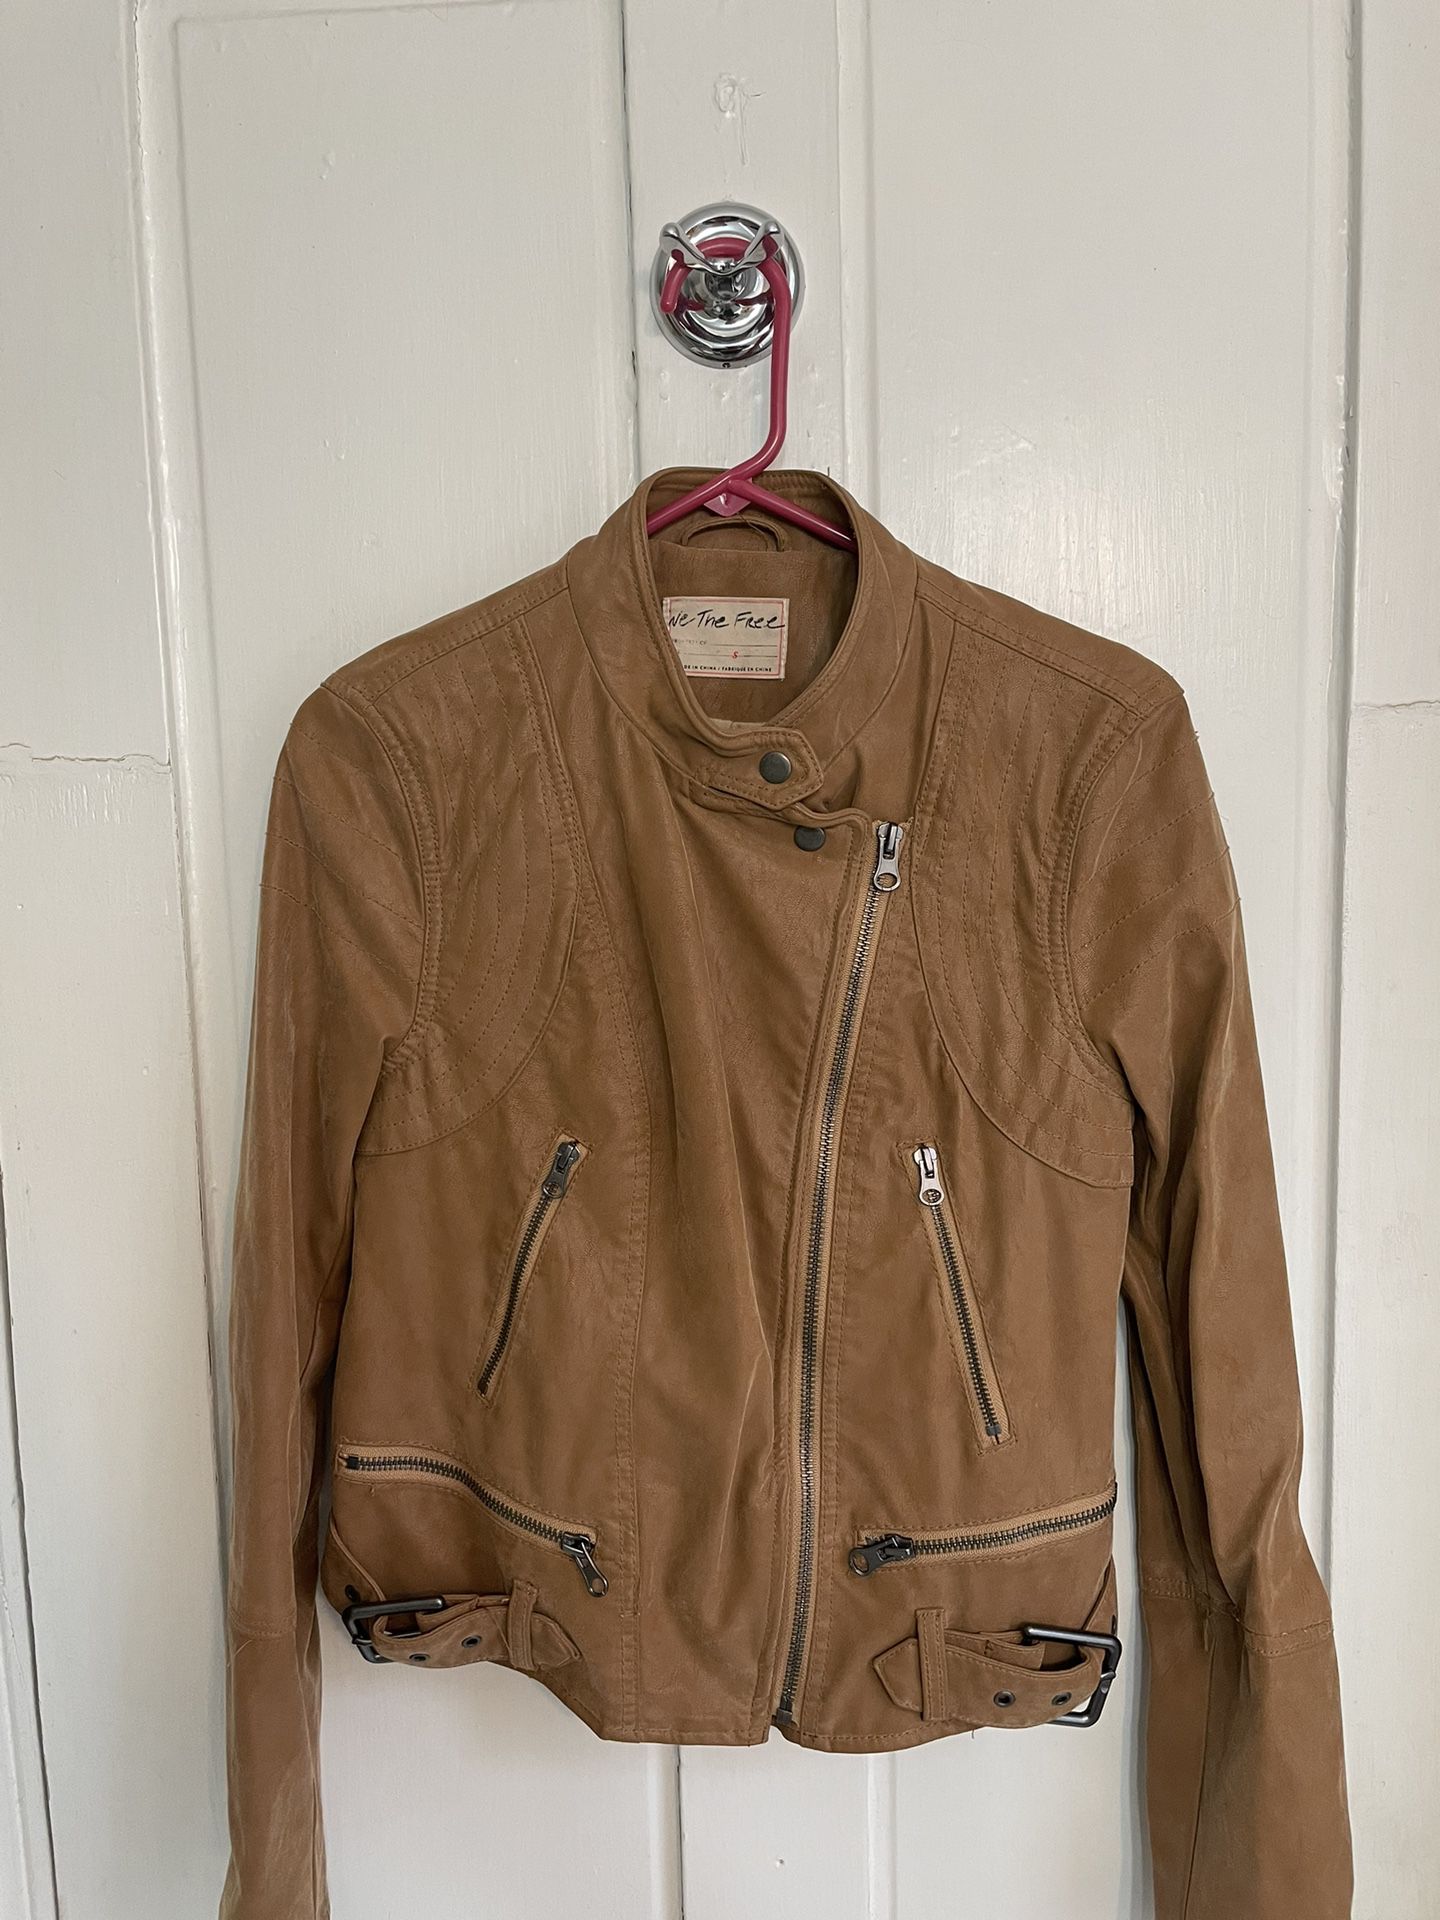 Women’s Free People Leather Jacket Size Small 